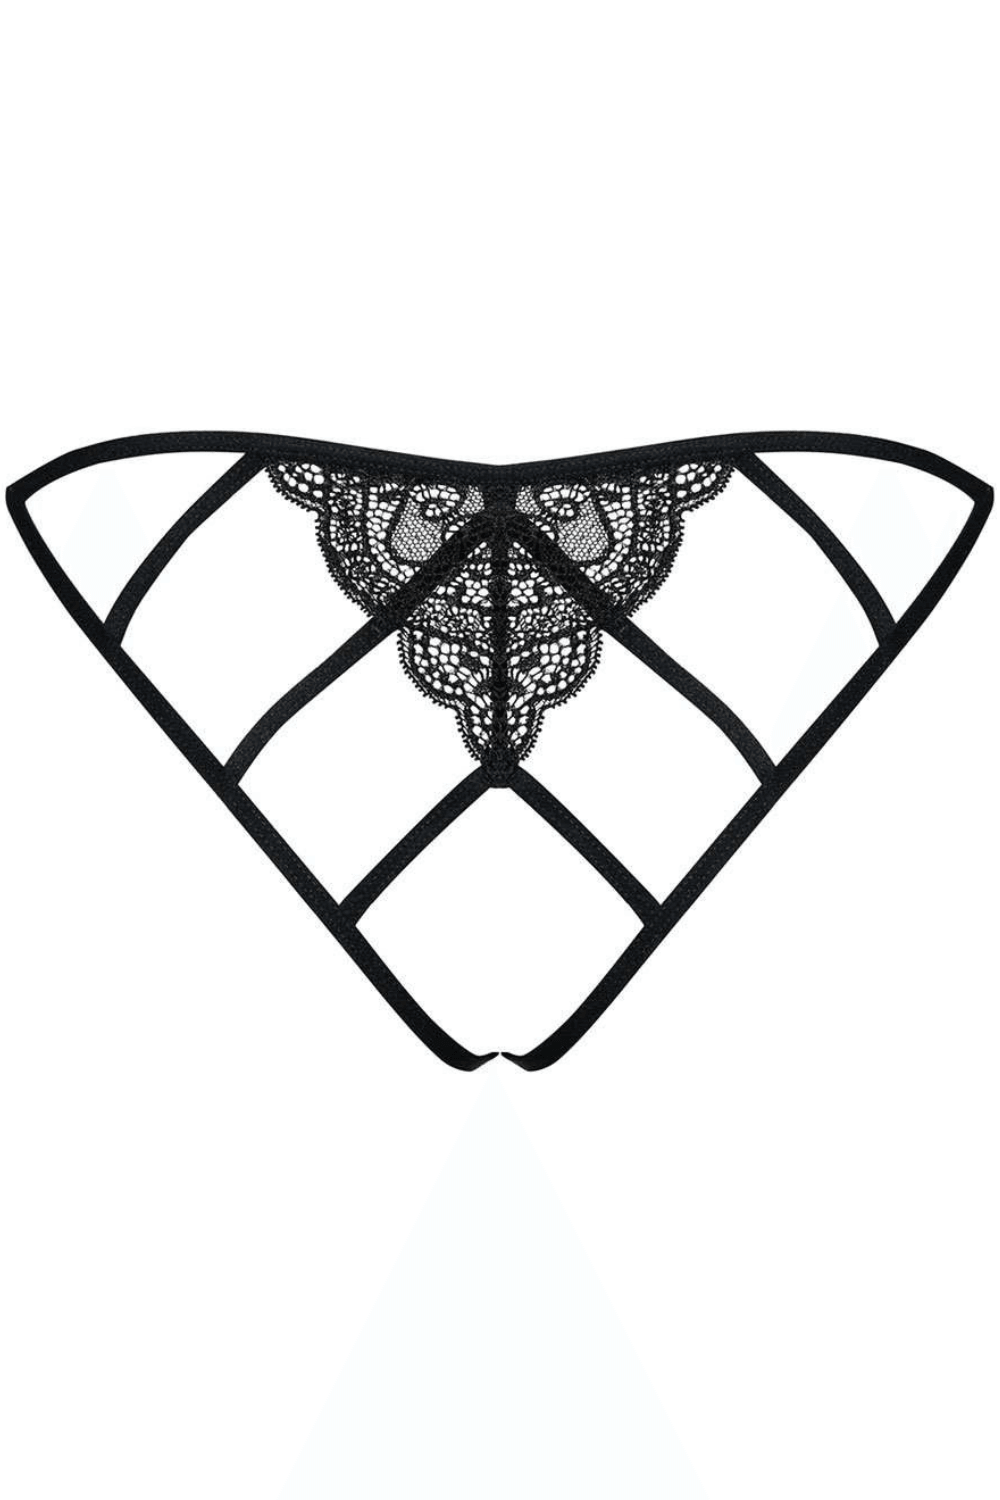 Obsessive Miamor Crotchless Brief